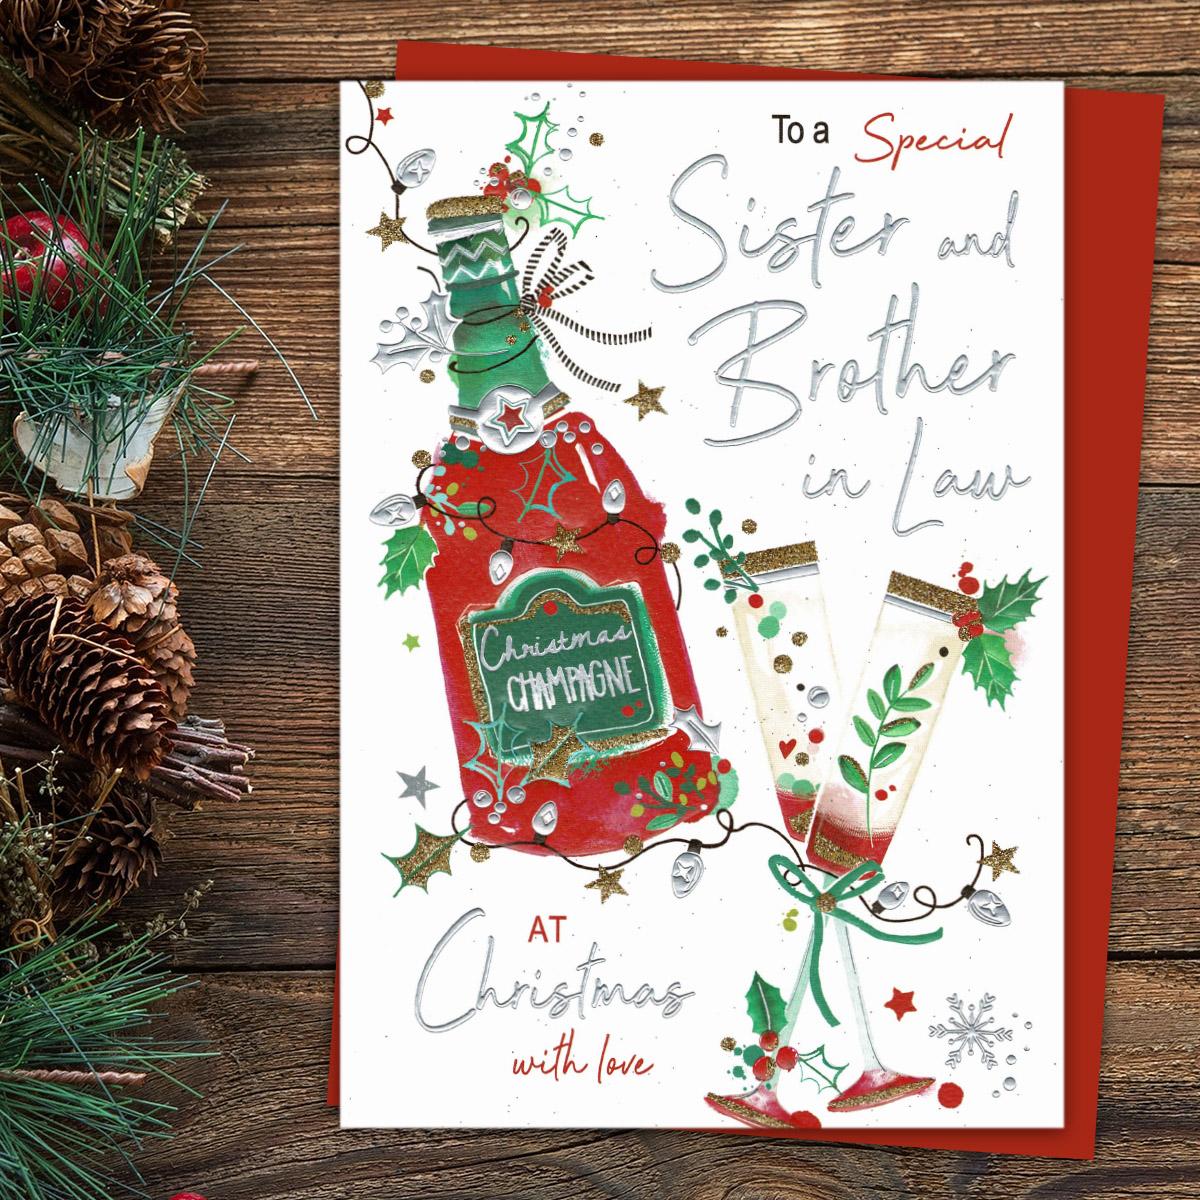 Special Sister & Brother in Law Christmas Card Front Image